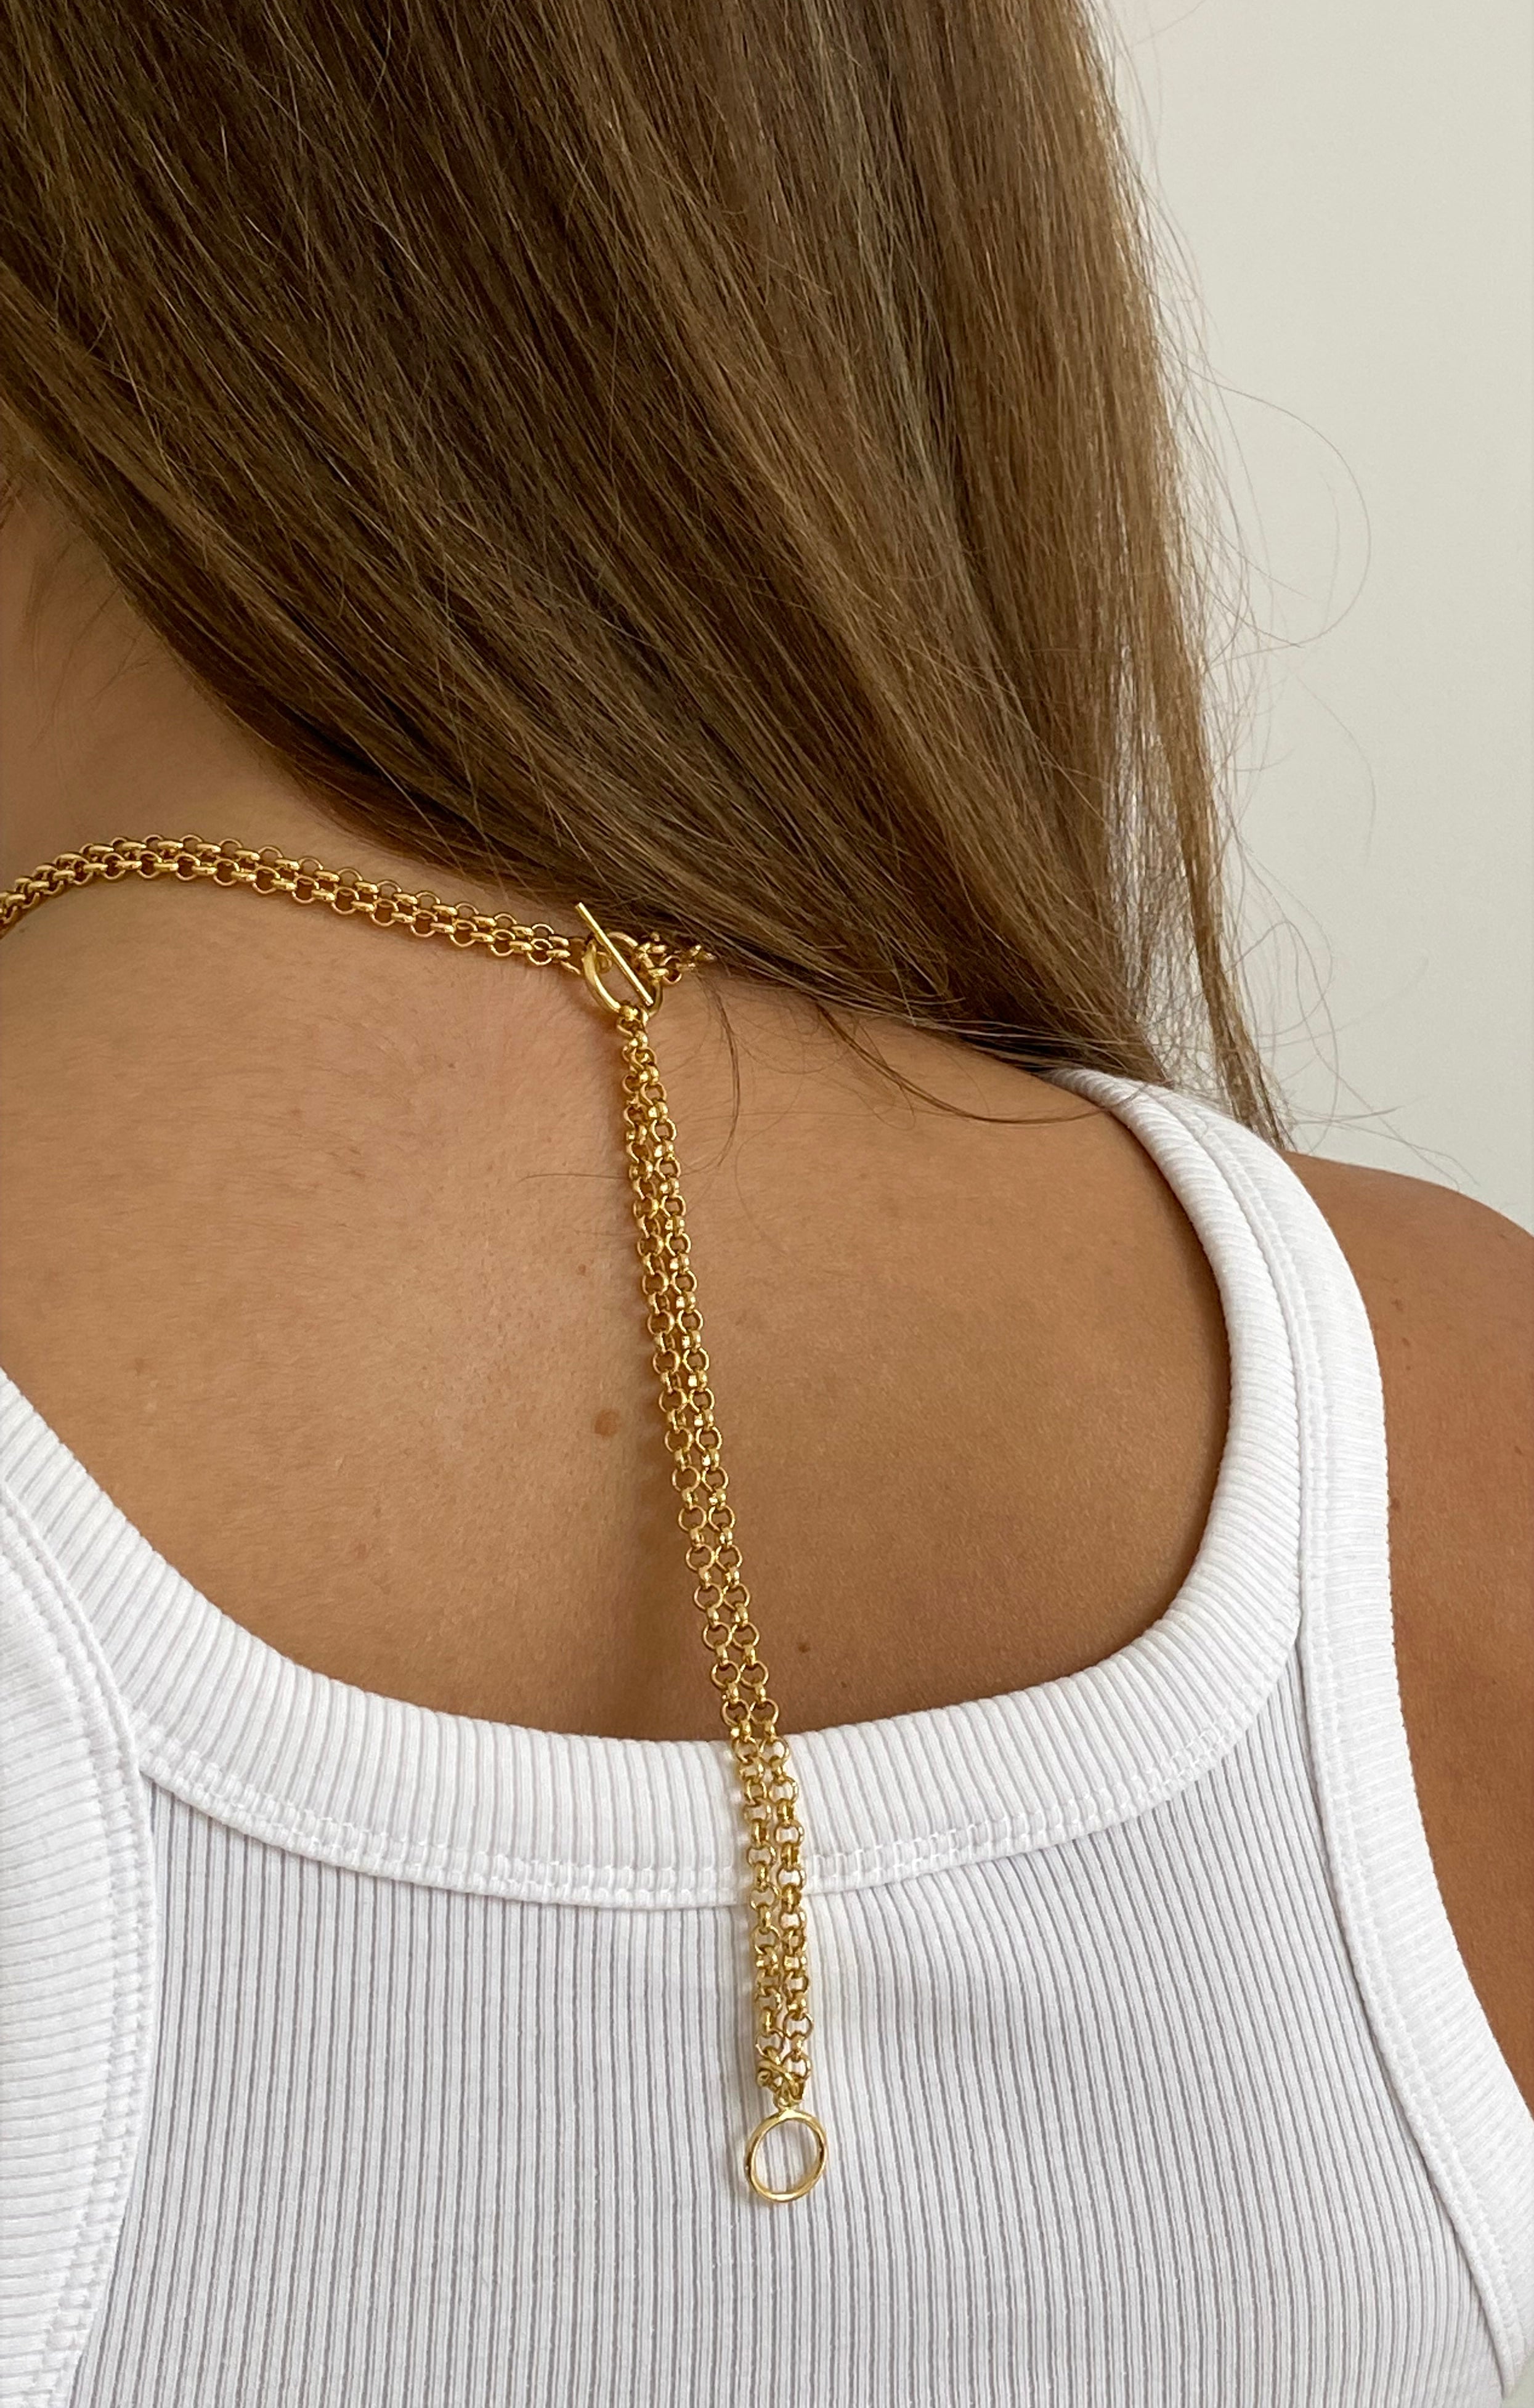 llayers Gold women minimal long chain choker necklace with stones Hancrafted in Brooklyn New York 10